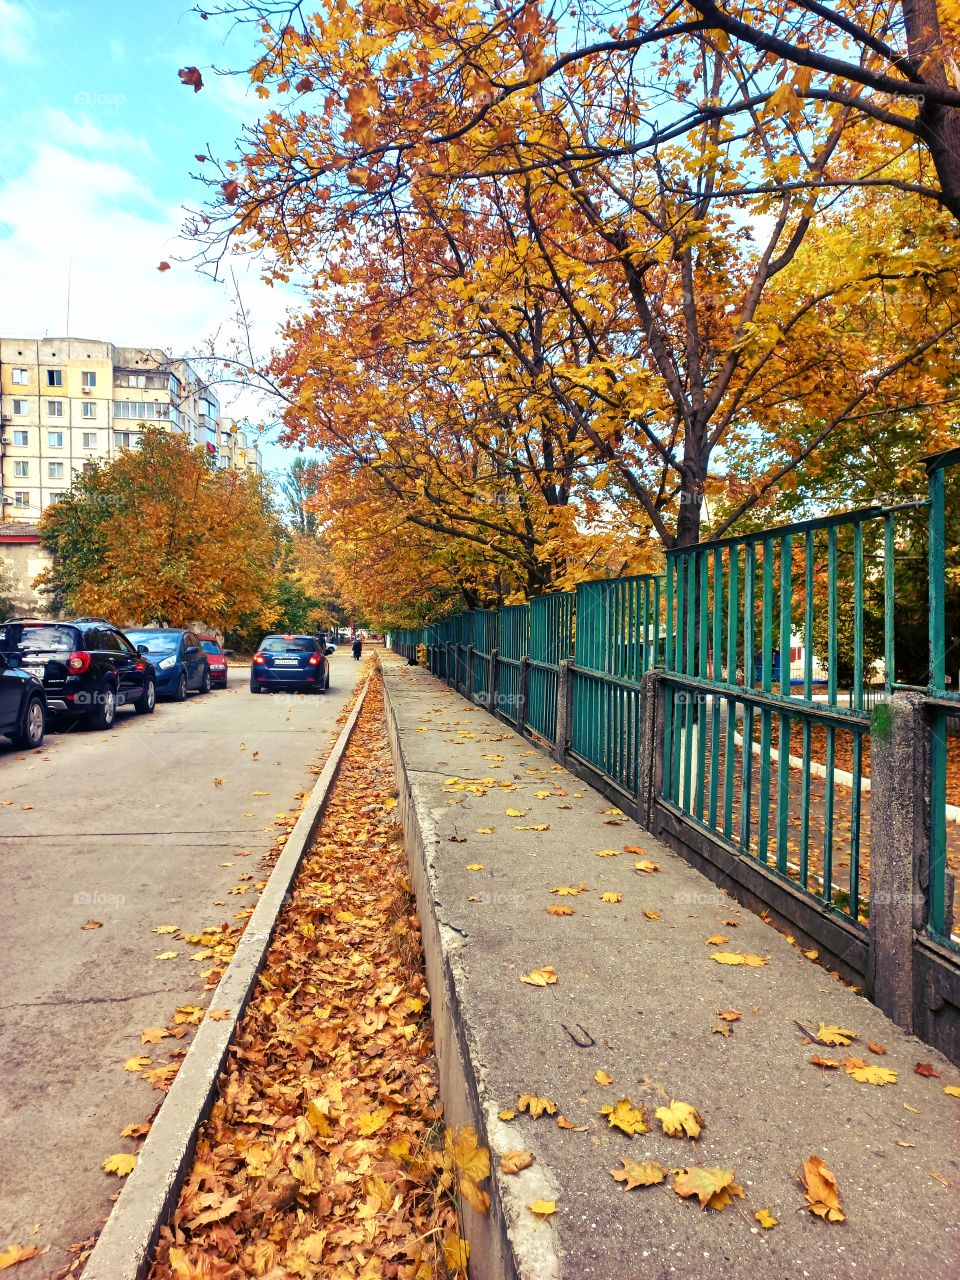 a quiet city street in October, a green fence stretches along the sidewalk, and yellow leaves lie on the ground...